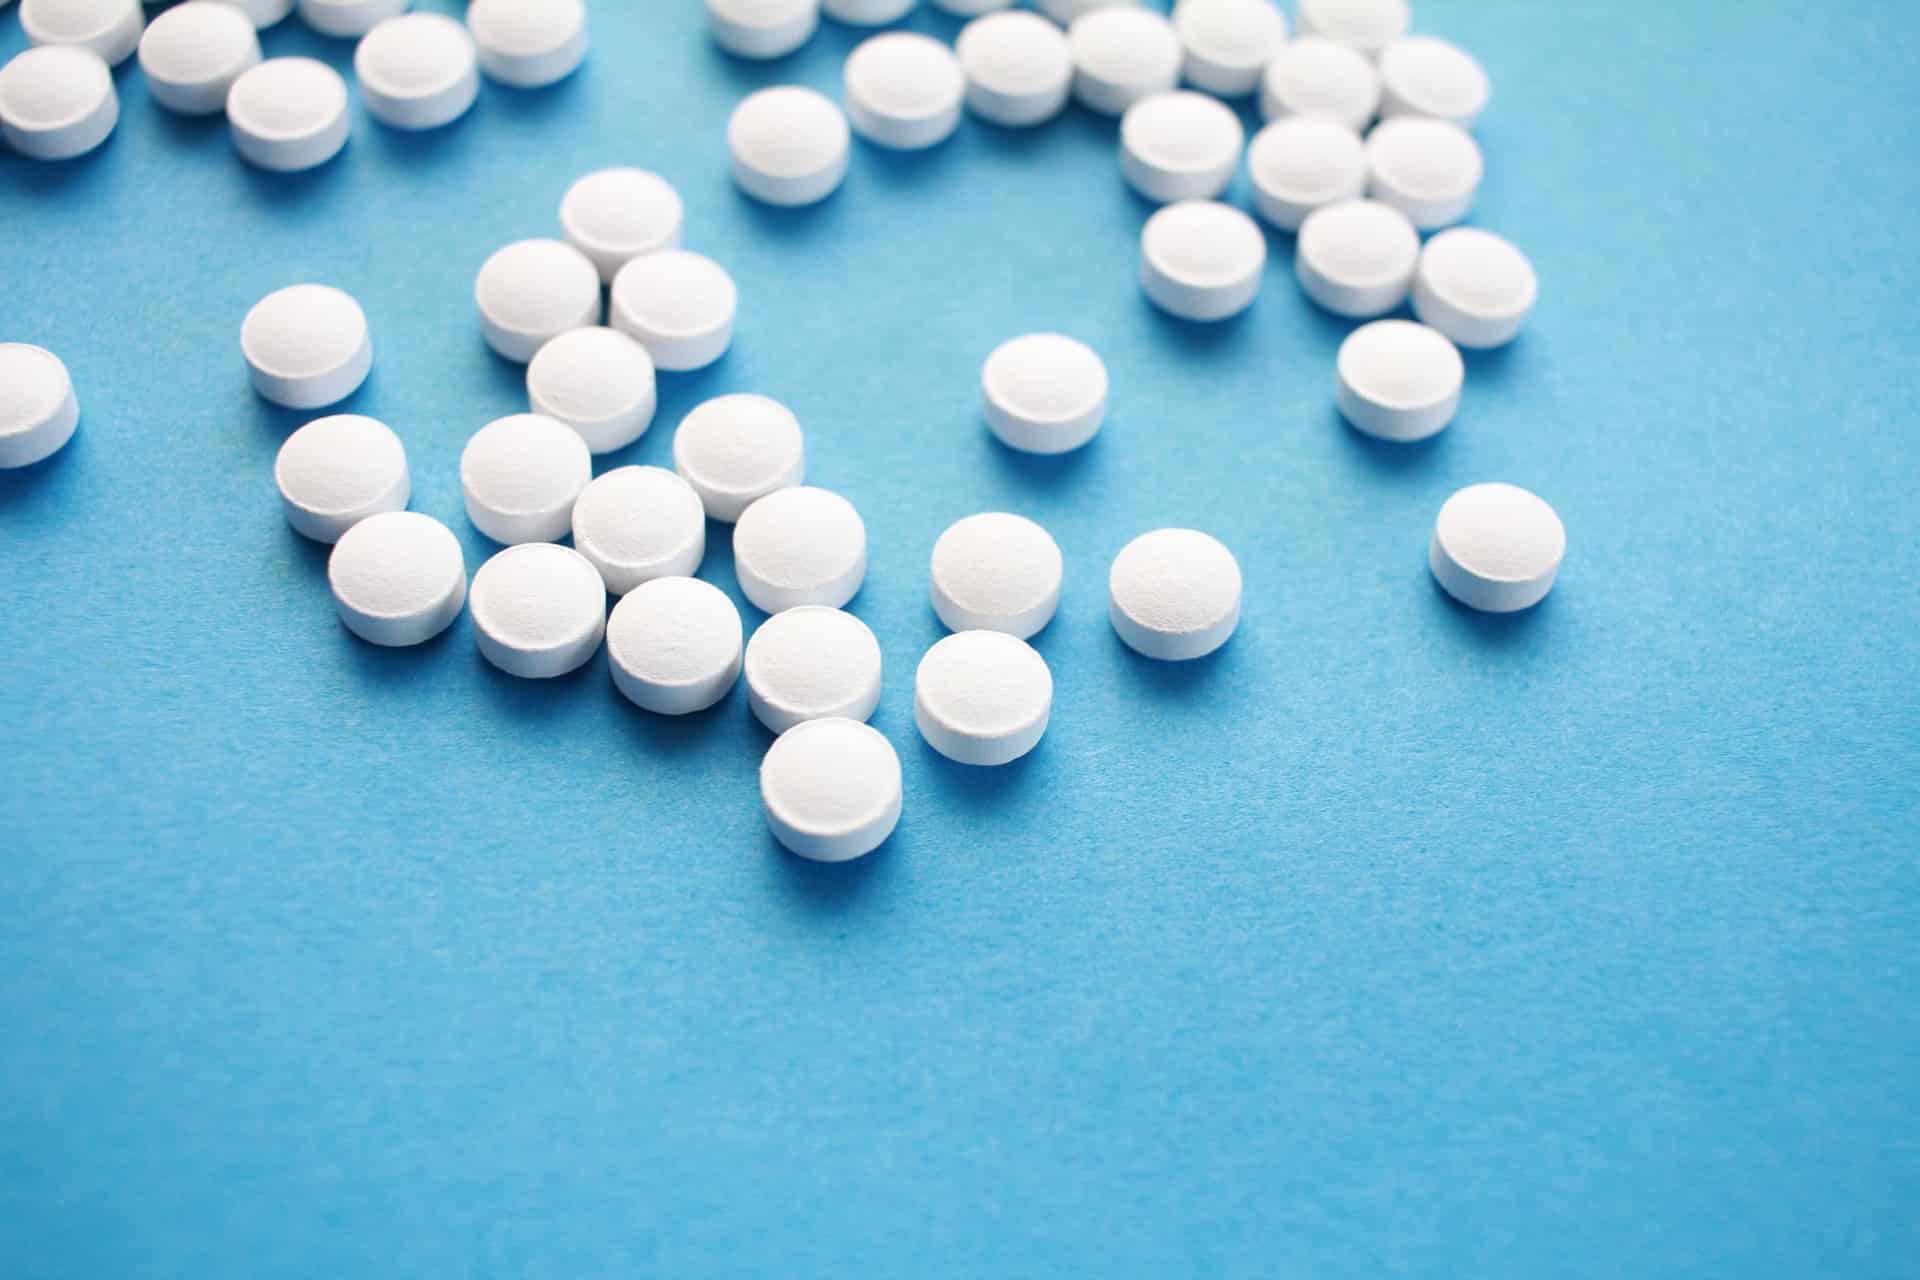 white opioid pills scattered on blue countertop